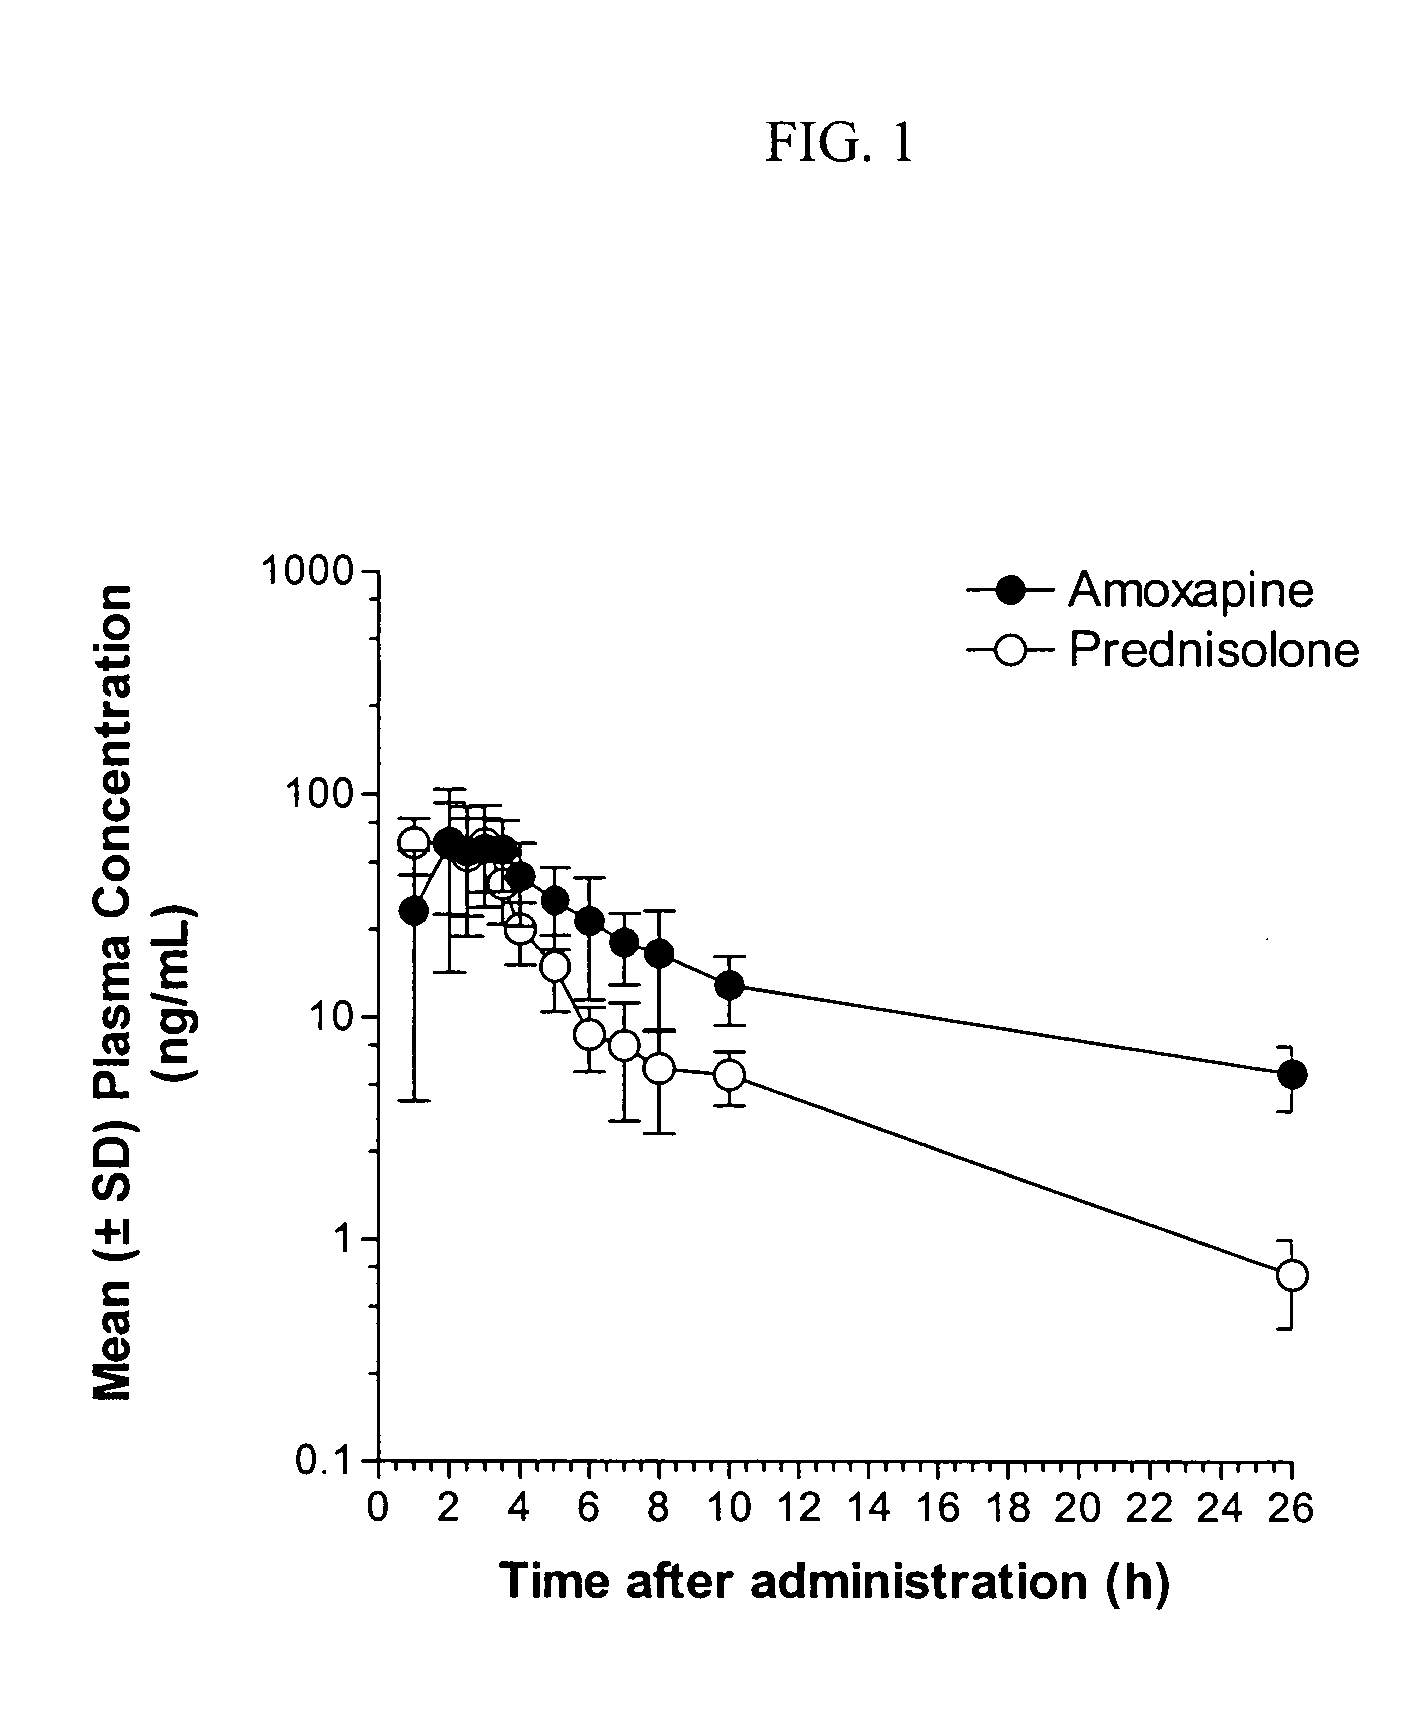 Therapeutic regimens for administering drug combinations